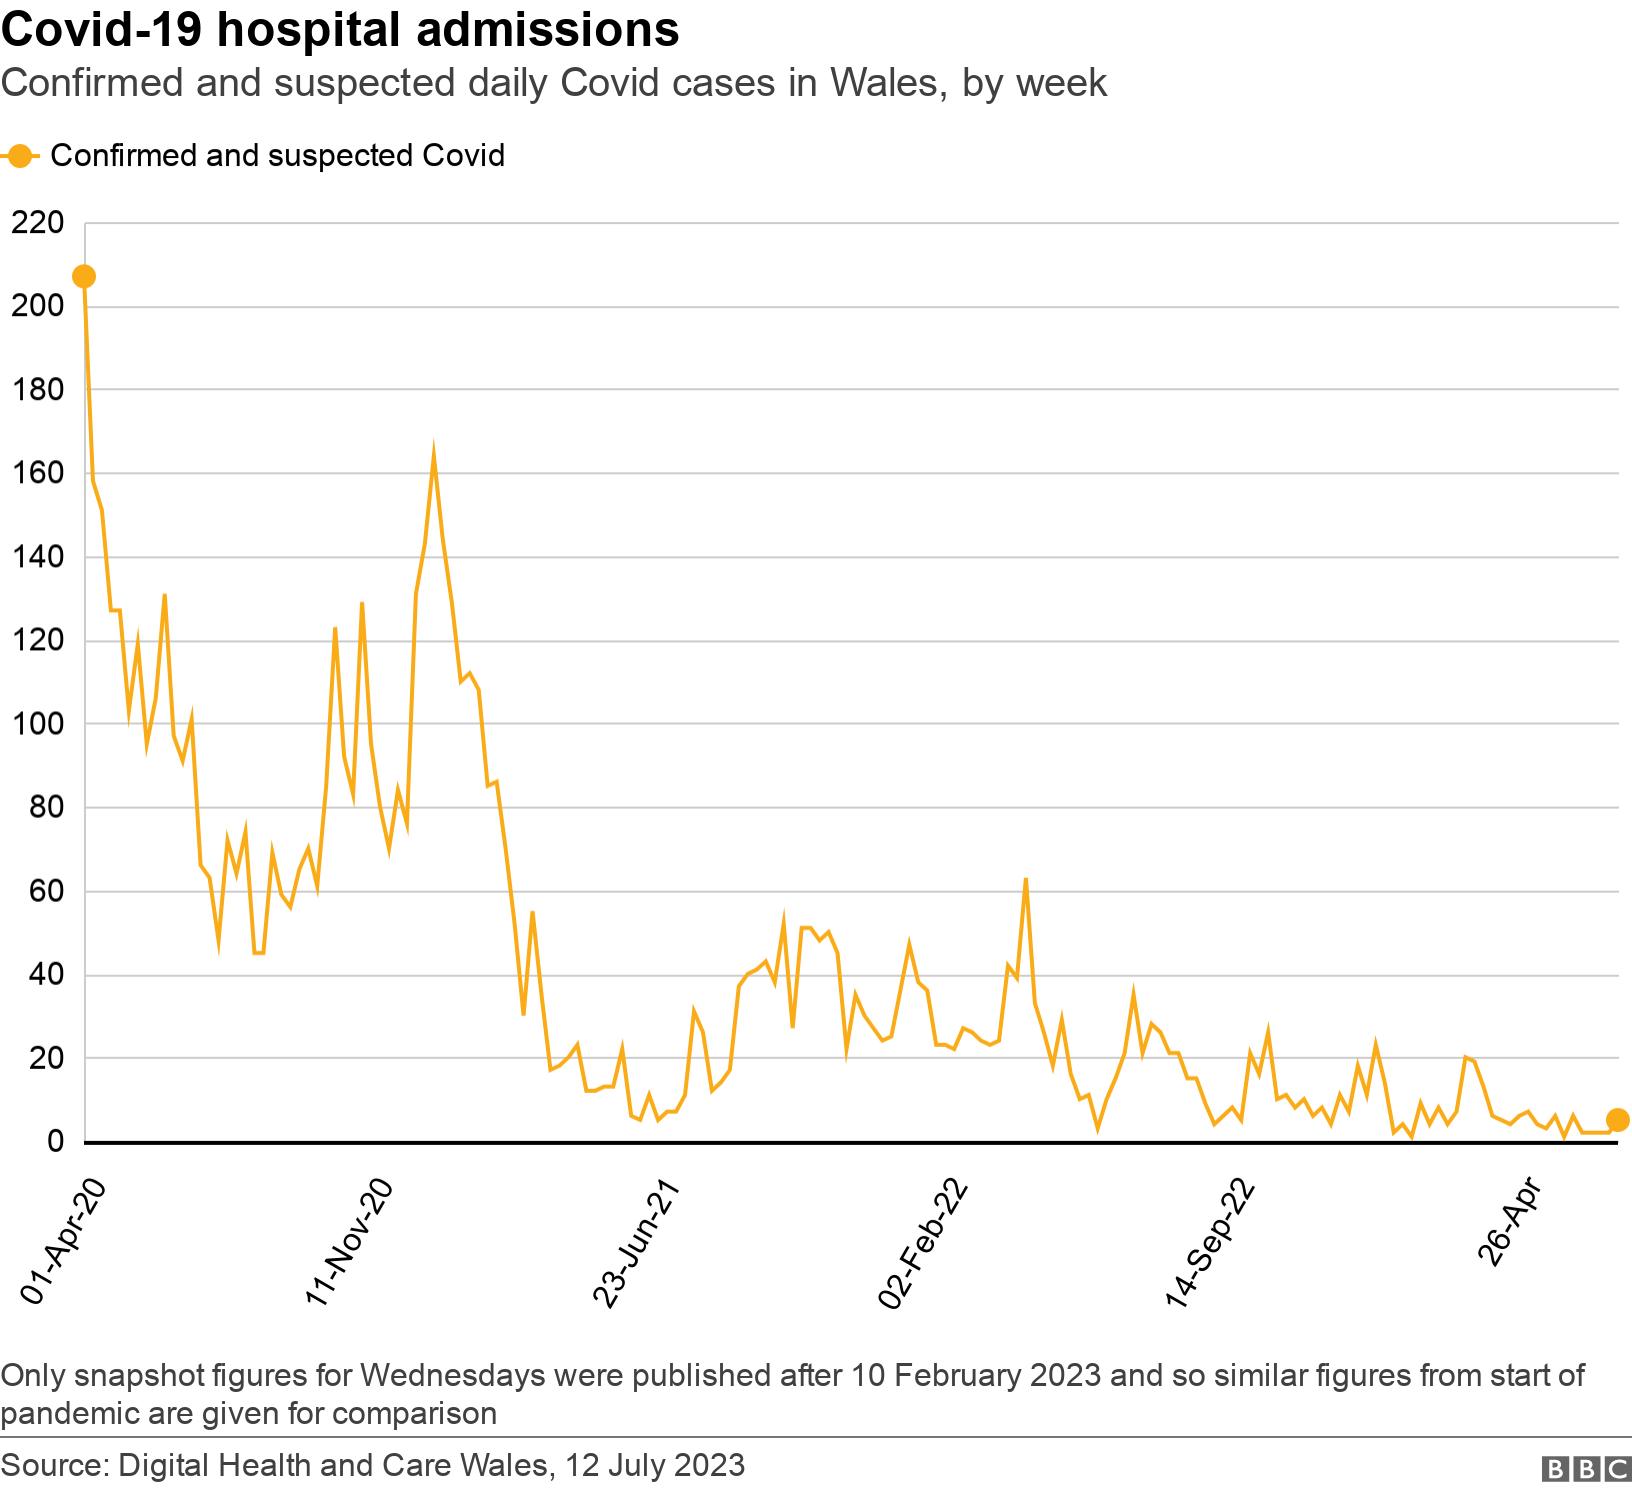 Covid-19 hospital admissions. Confirmed and suspected daily Covid cases in Wales, by week.   Only snapshot figures for Wednesdays were published  after 10 February 2023 and so similar figures from start of pandemic are given for comparison.